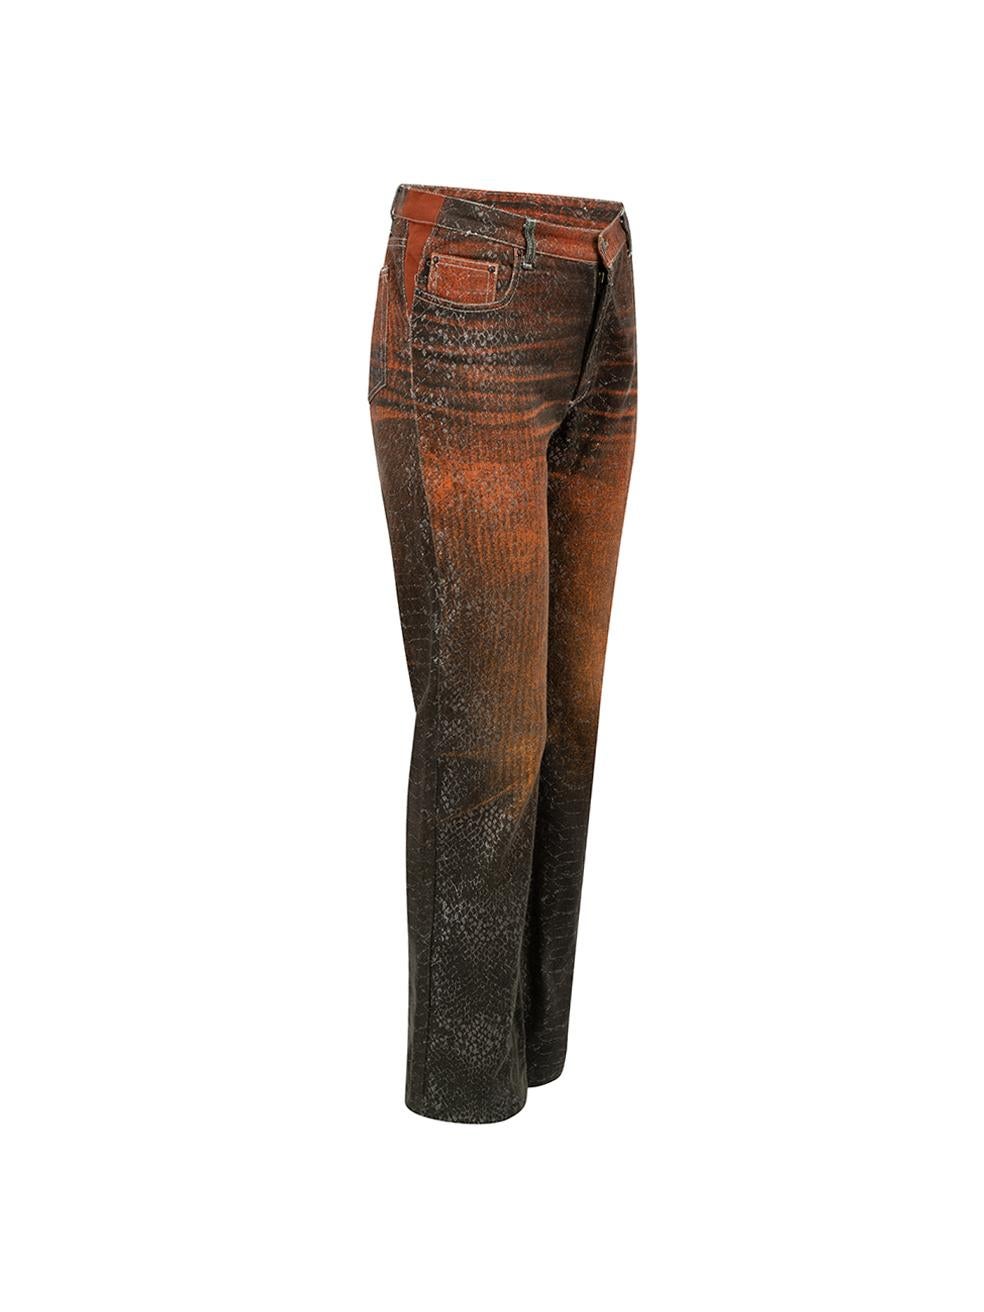 CONDITION is Good. General wear to jeans is evident. Moderate signs of discolouration to lining and fading to crotch seam on this used Just Cavalli designer resale item.



Details


Multicolour

Denim

Straight leg jeans

Snakeskin animal print